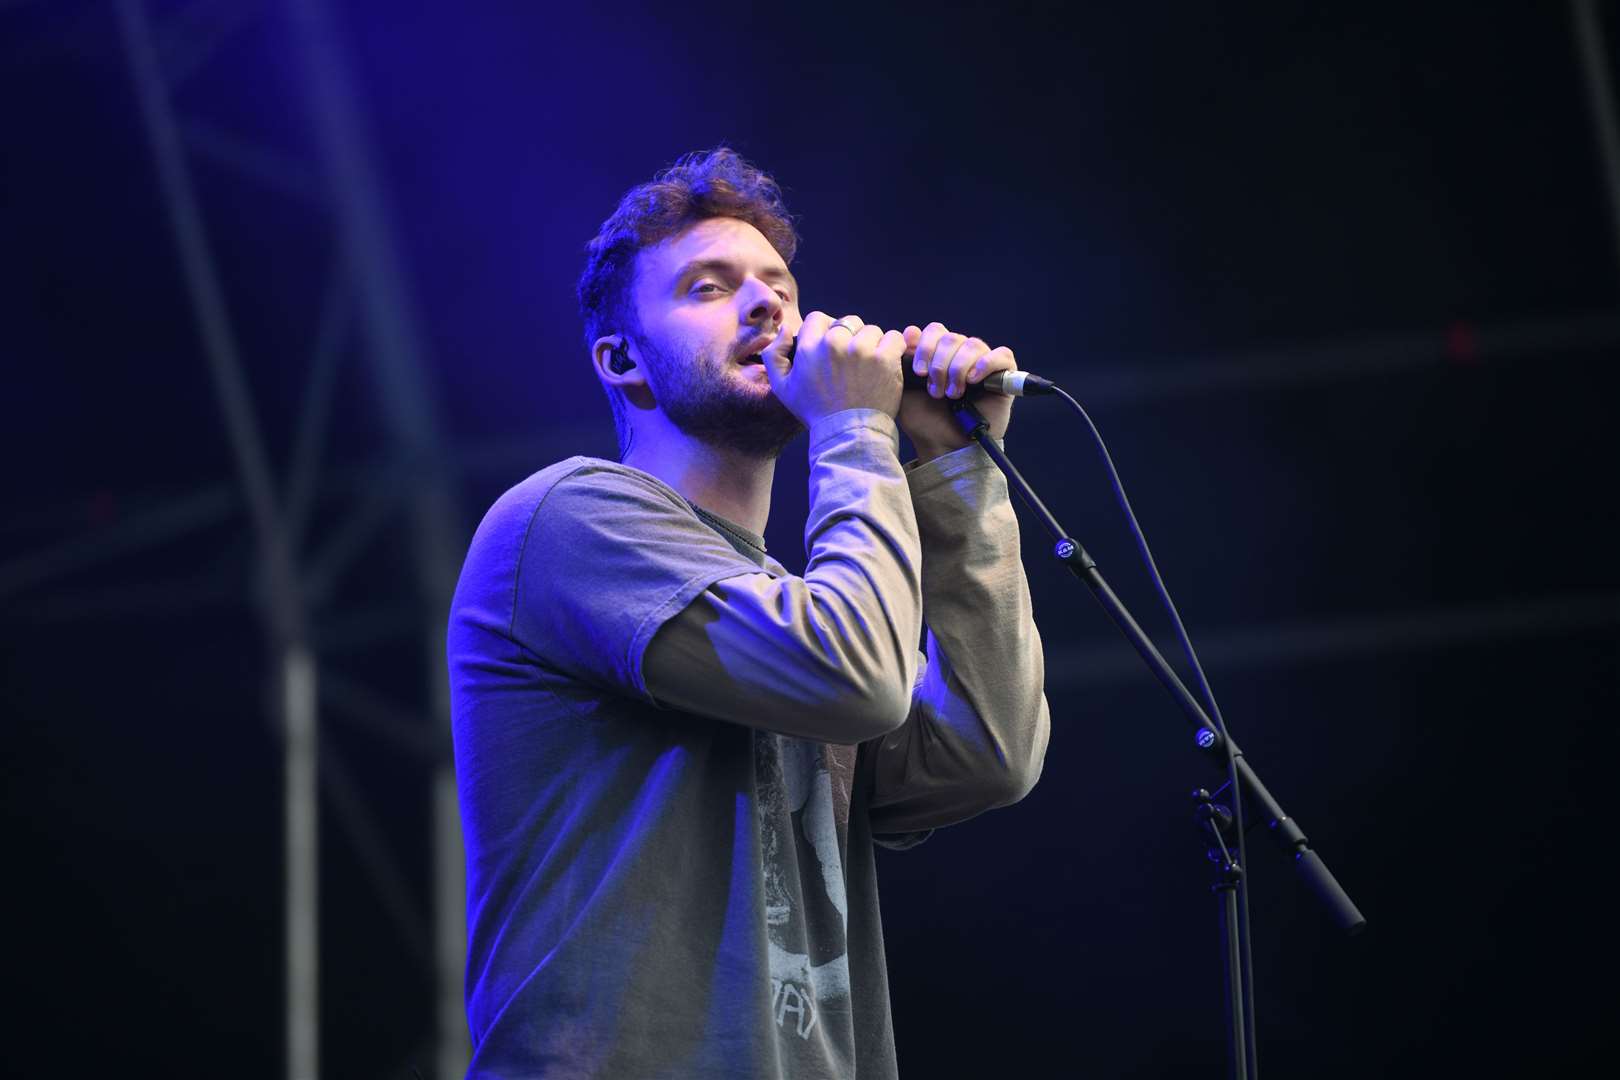 Keir Gibson on stage during his set supporting Clean Bandit and Ella Henderson in June at the Northern Meeting Park. Picture: James Mackenzie